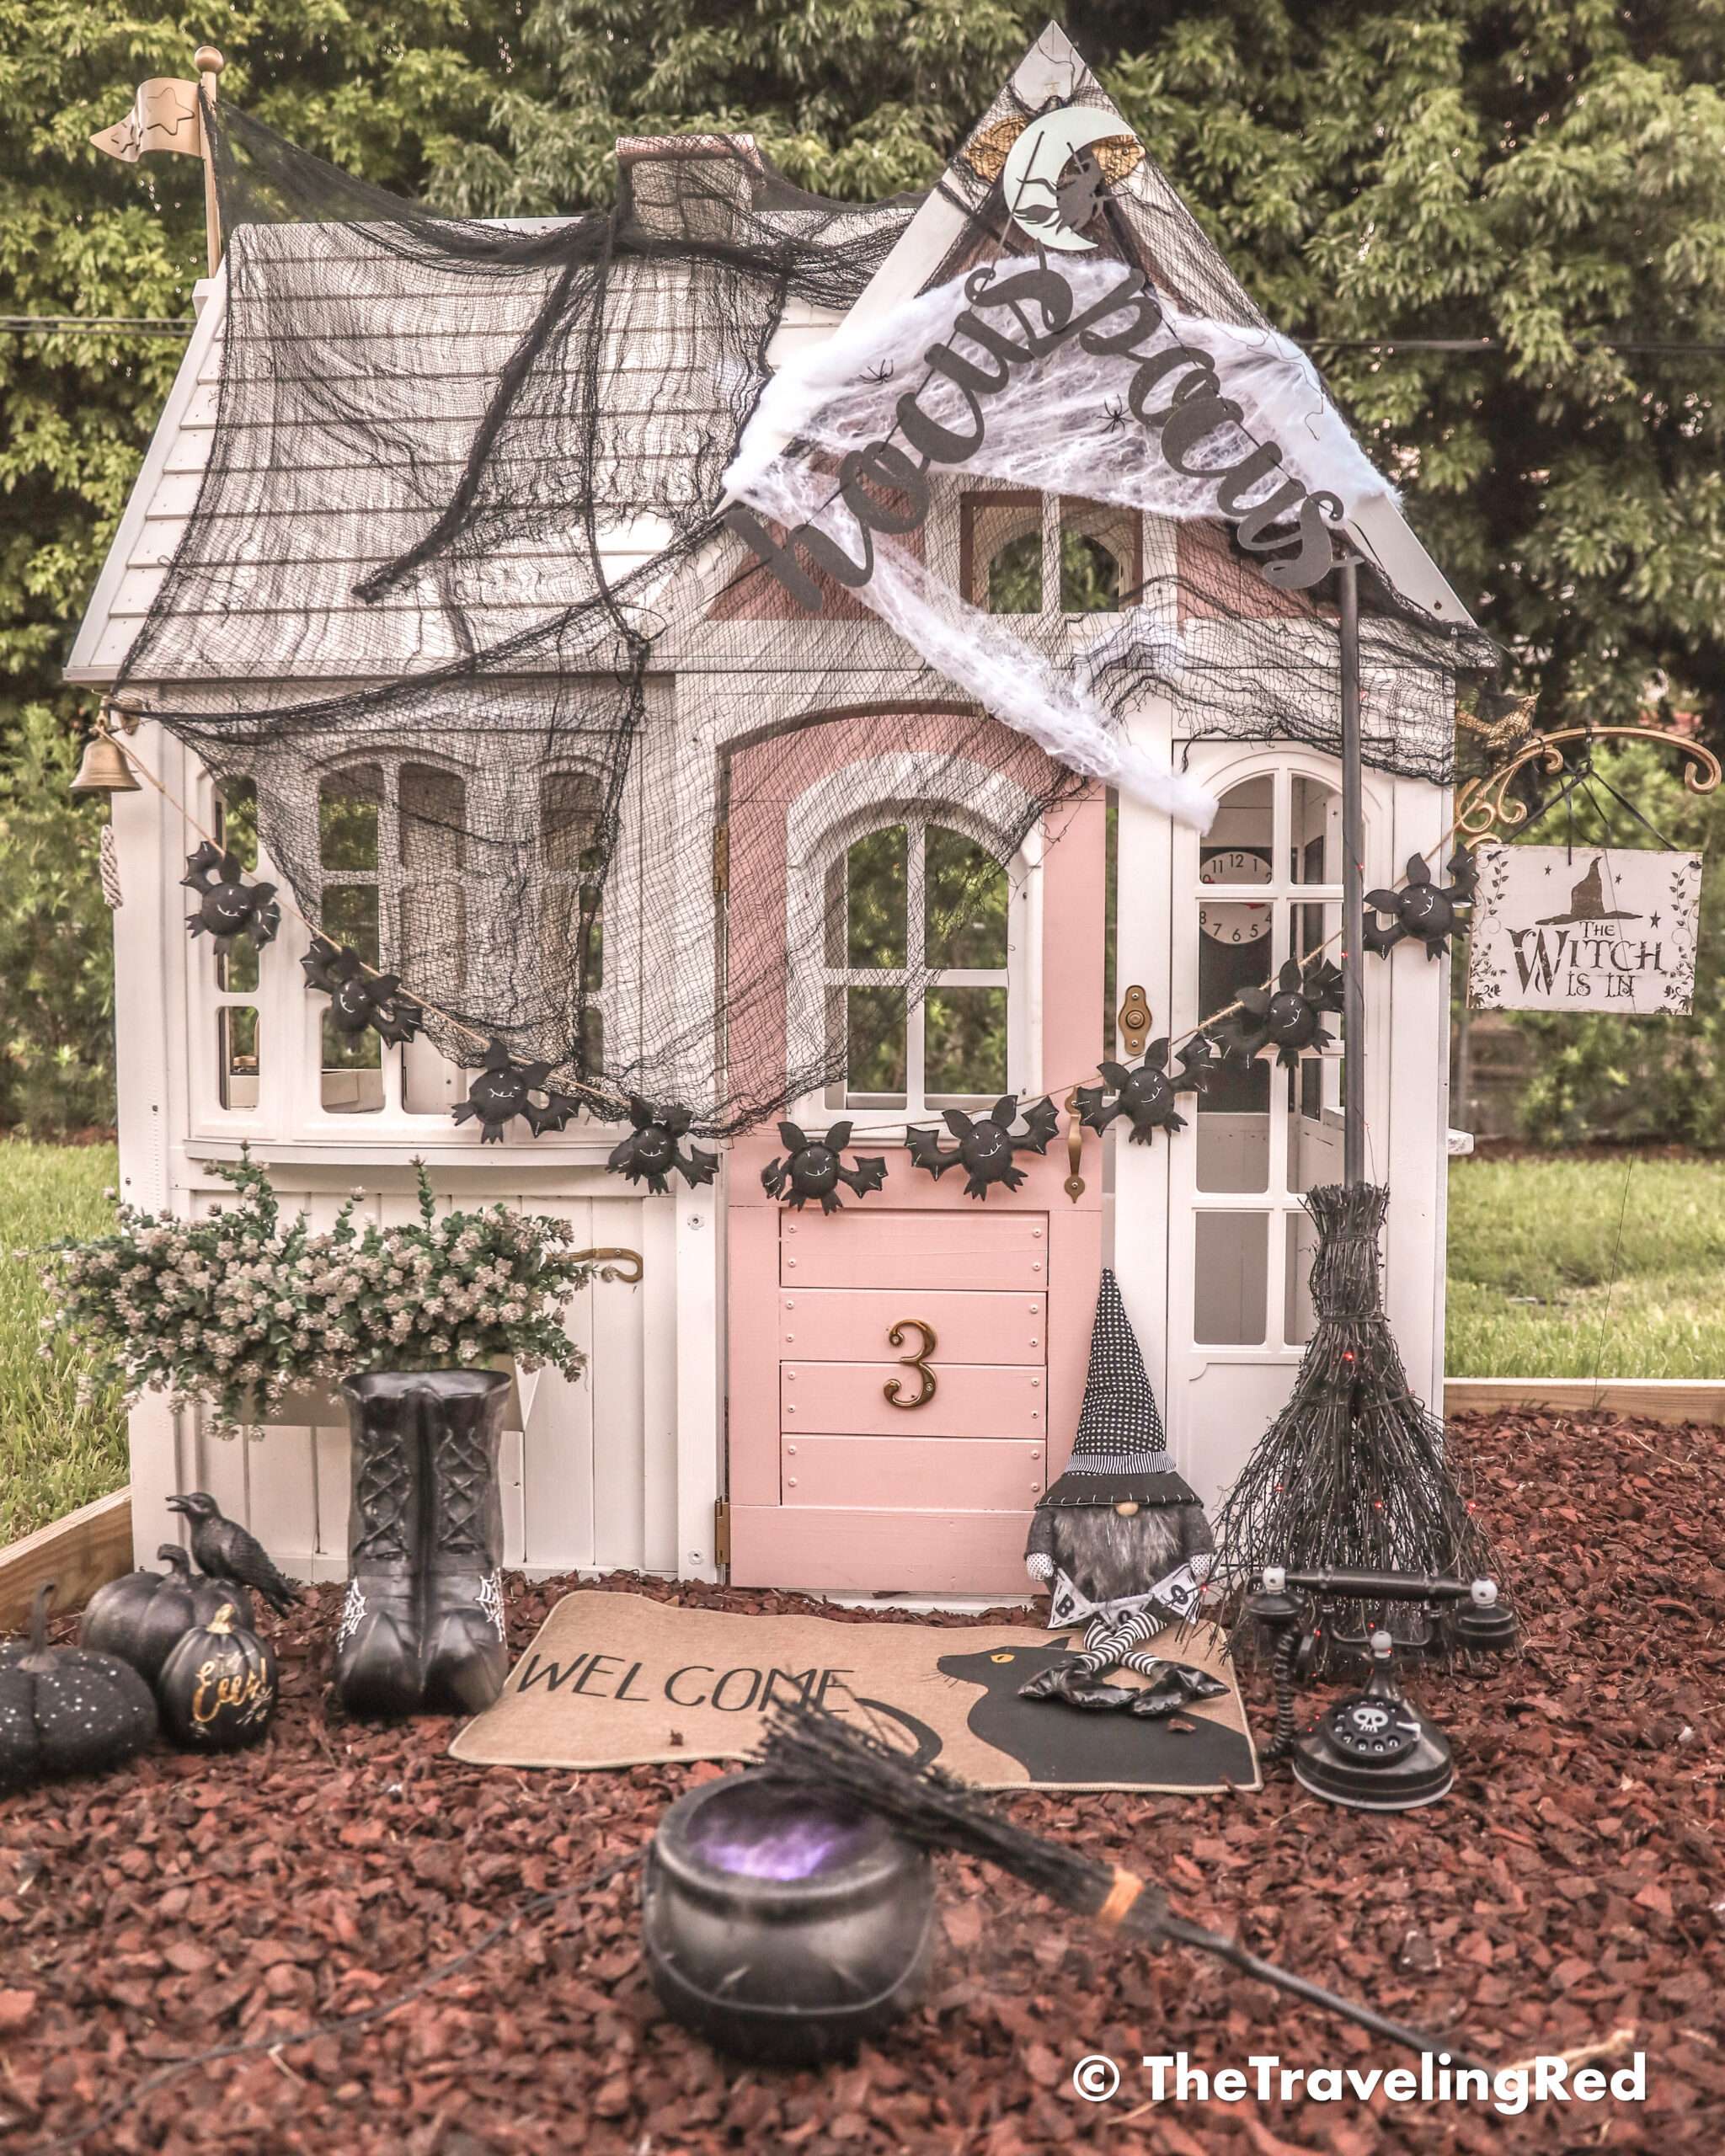 Hocus Pocus Halloween Playhouse - Halloween Decorations to turn a renovated outdoor playhouse into a spooky witches home perfect for playtime during the month of October | added spider webs, bats, witches boots and broomstick, a cauldron and the cutest witch costumes | remodeled DIY pink and white playhouse #playhouse #halloween #witch